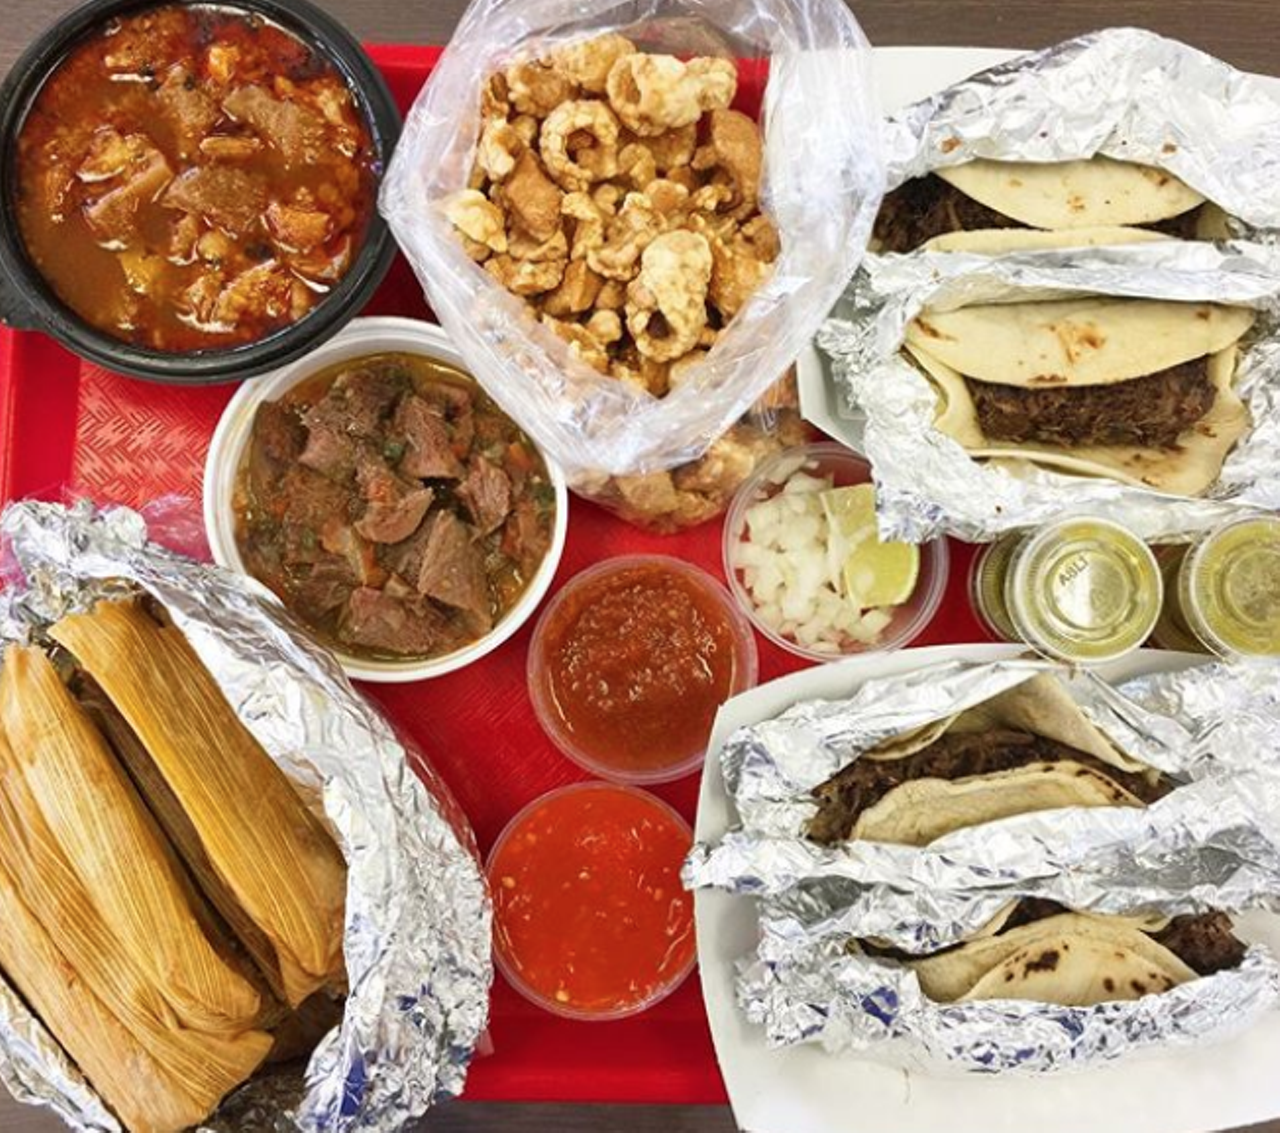 Tellez Tamales & Barbacoa
1737 S General McMullen Dr, (210) 433-1367, facebook.com
Whether barbacoa or tamales is your vice, enjoying these staples is a quintessential puro San Antonio experience. Don’t let the long lines around the holidays discourage you from stopping in – these savory bites are worth it, no matter how long the wait. Just don’t forget to grab all the salsas and Big Red to complete your too-damn-delicious meal.
Photo via Instagram / fitproblems